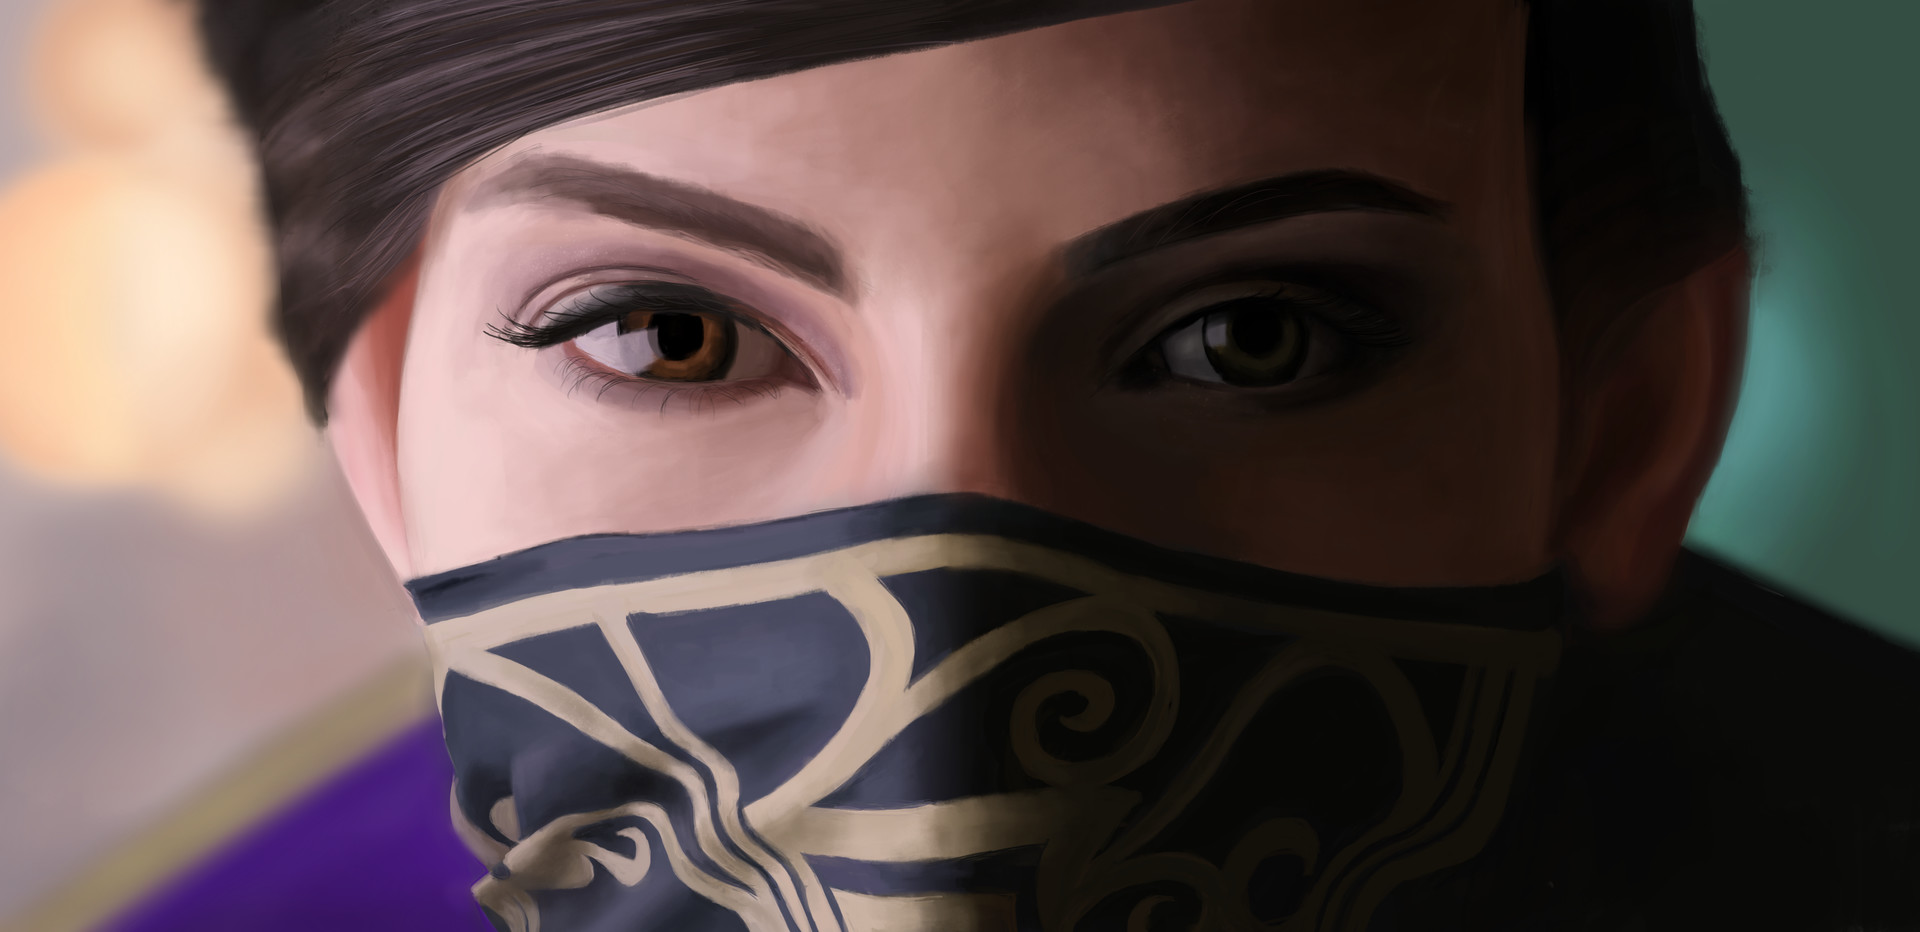 Dishonored 2 Wallpaper by Becky Hall